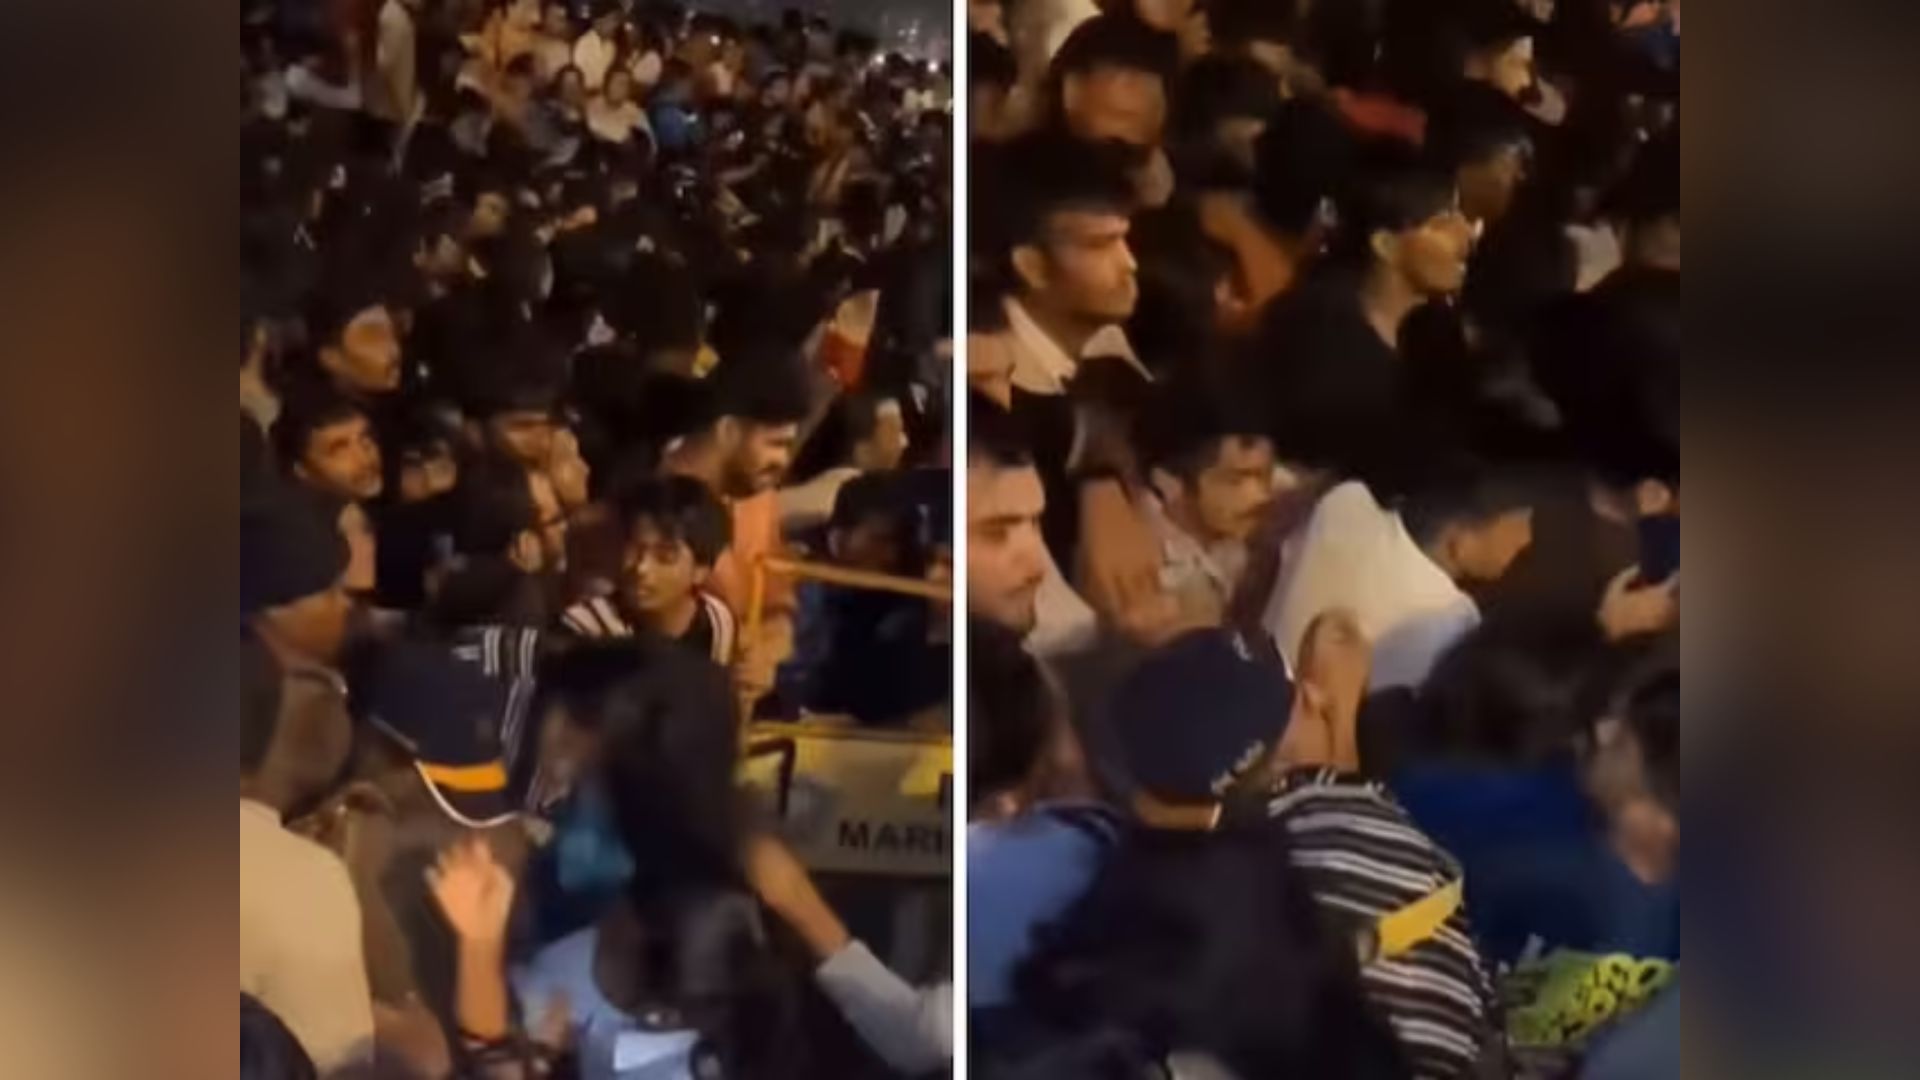 T20 World Cup Victory Celebration: Mumbai Cop Rescues Unconscious Woman Amidst Chaotic Crowd